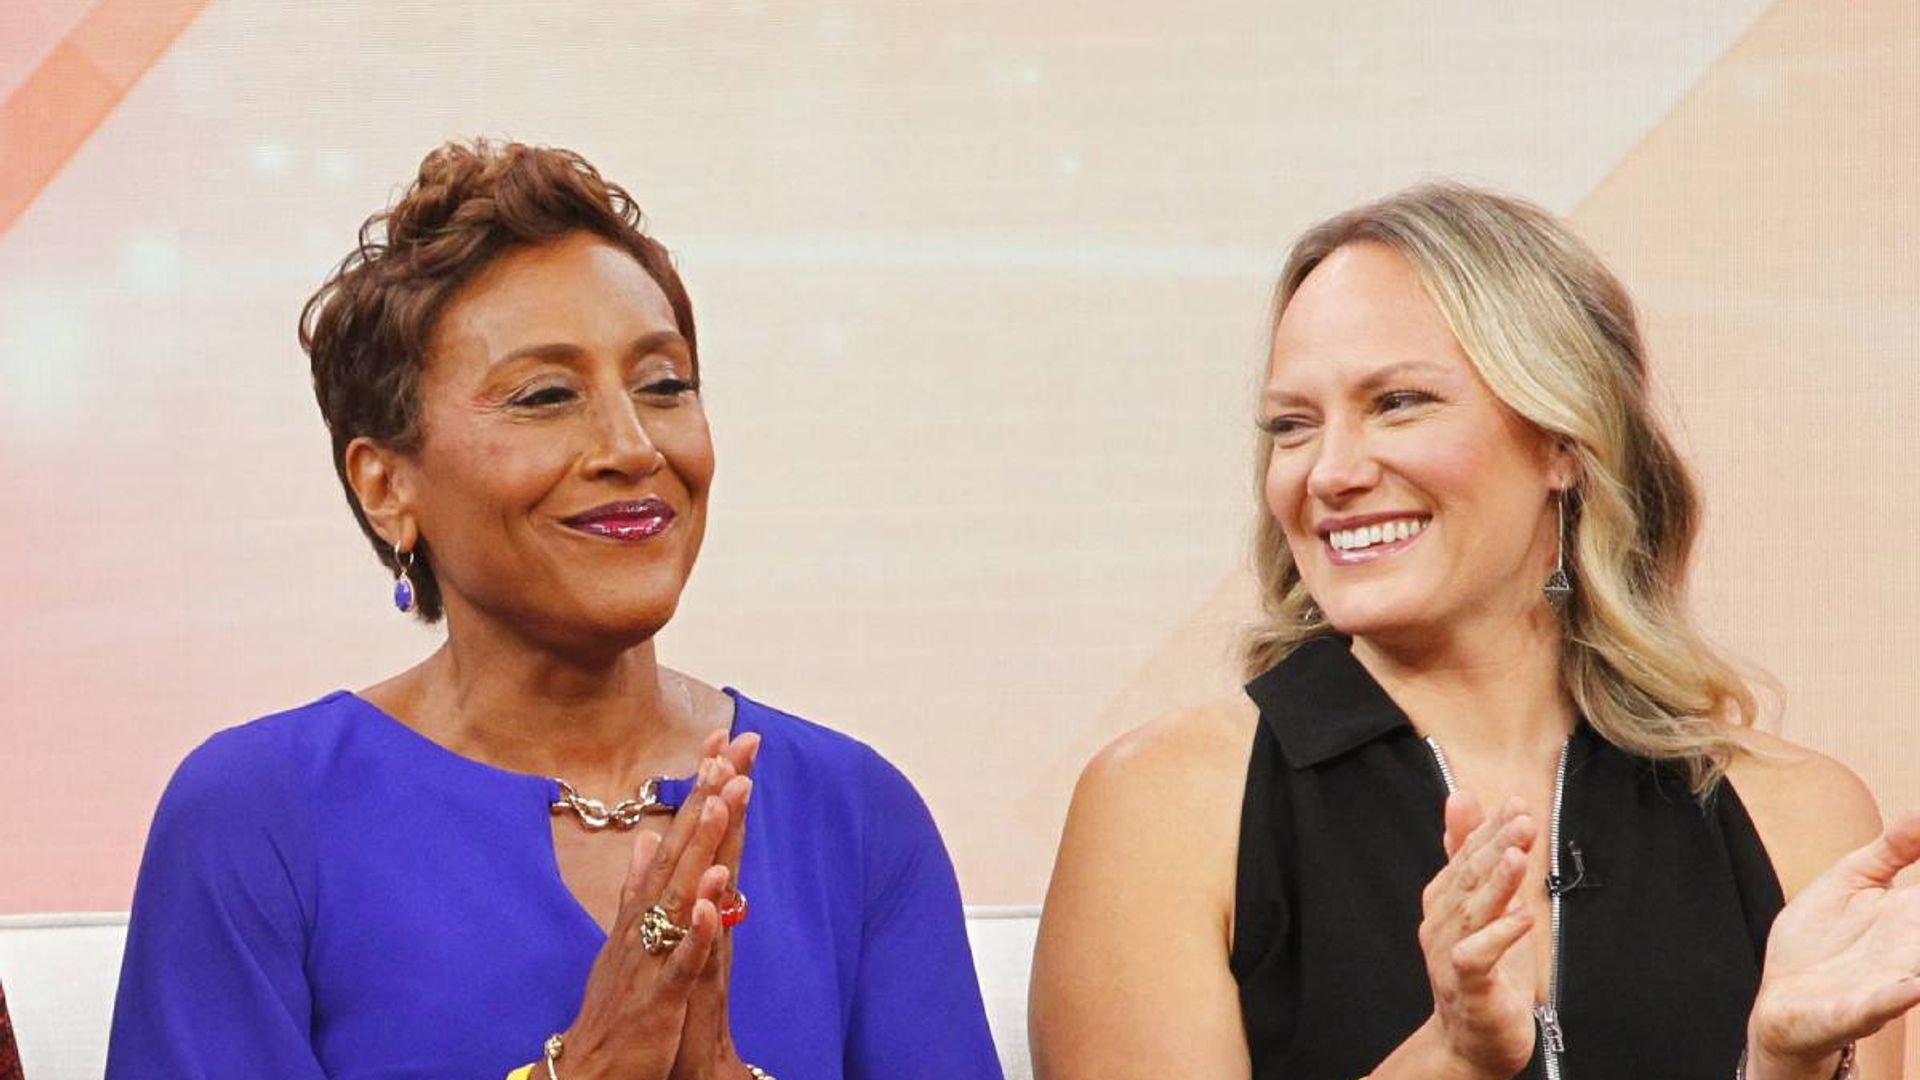 Robin Roberts' partner Amber showcases her dance moves inside their impressive NY penthouse